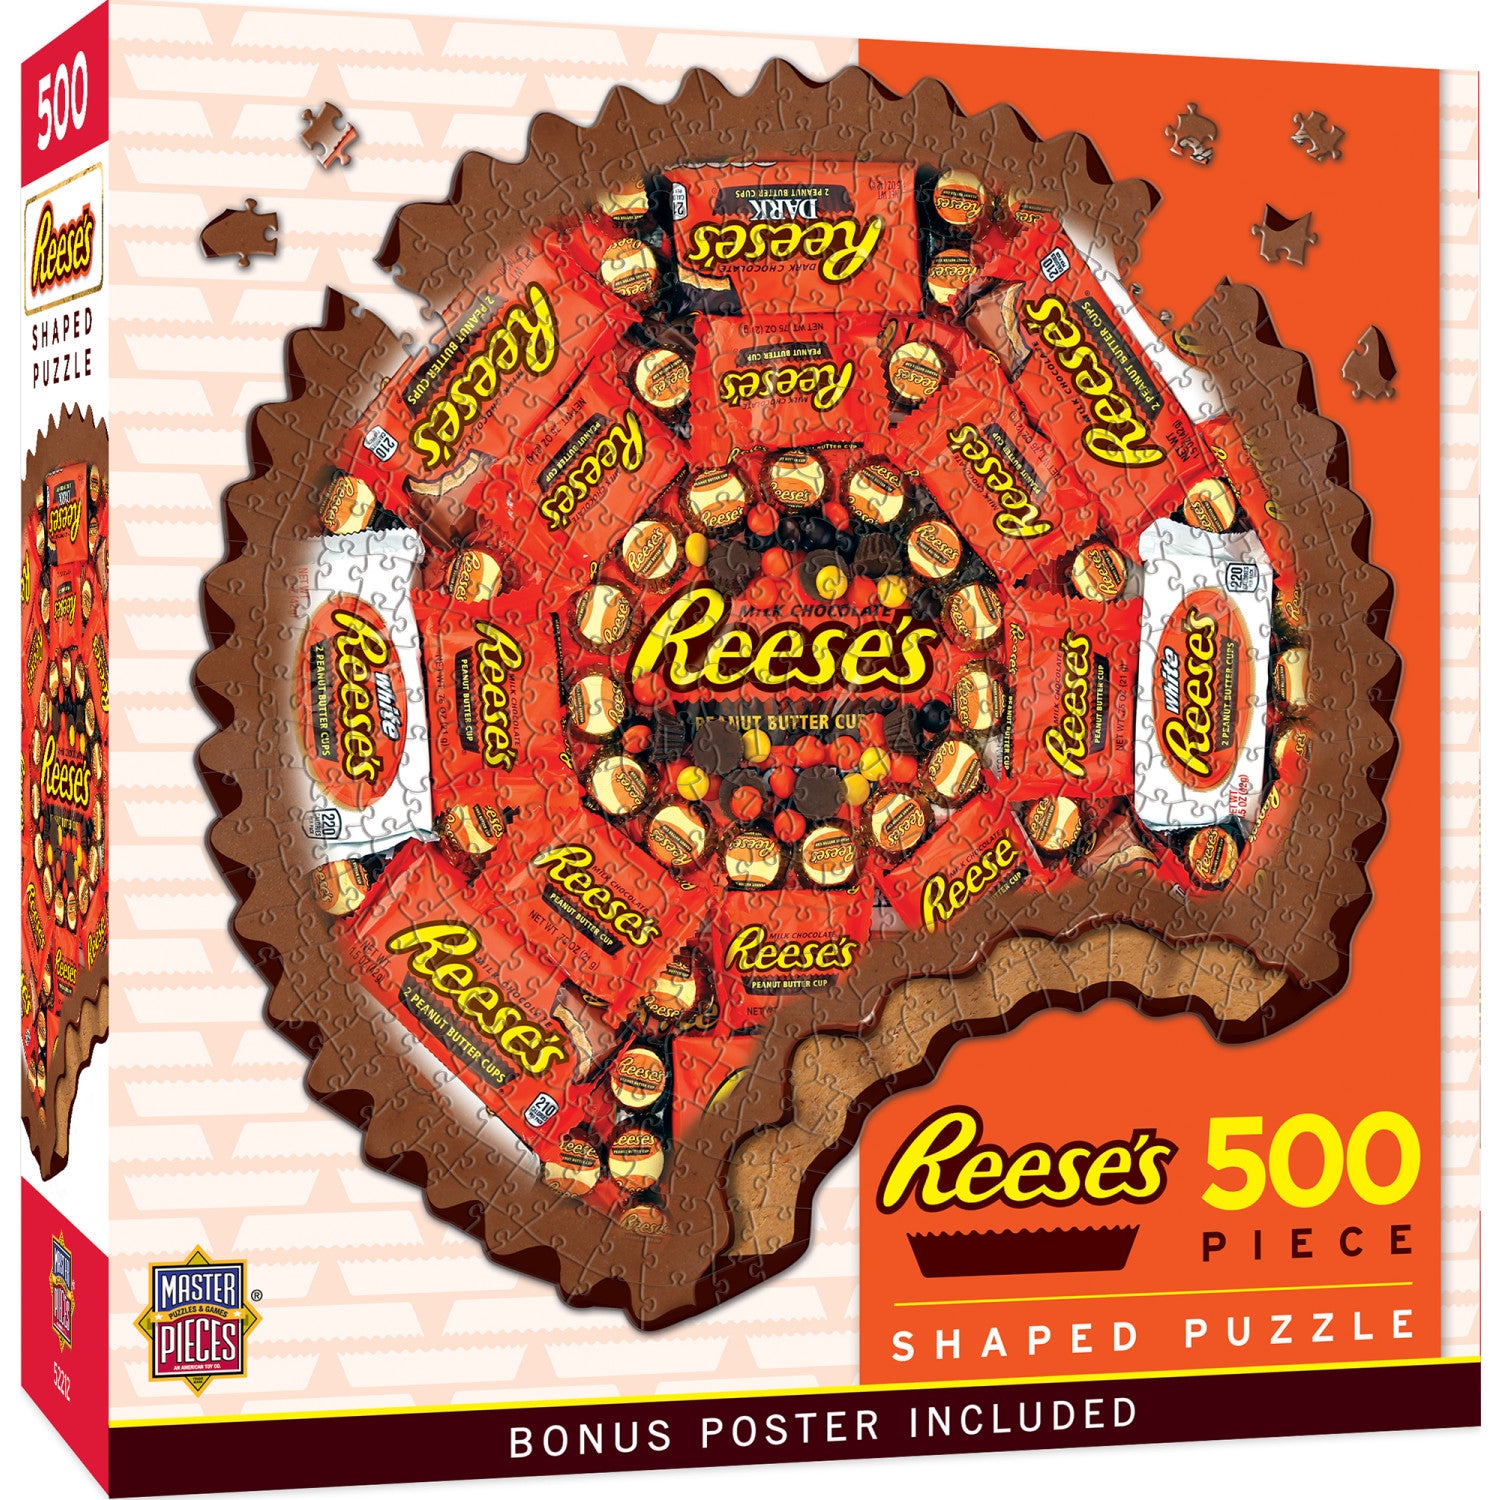 Hershey's Reese's - 500 Piece Shaped Jigsaw Puzzle